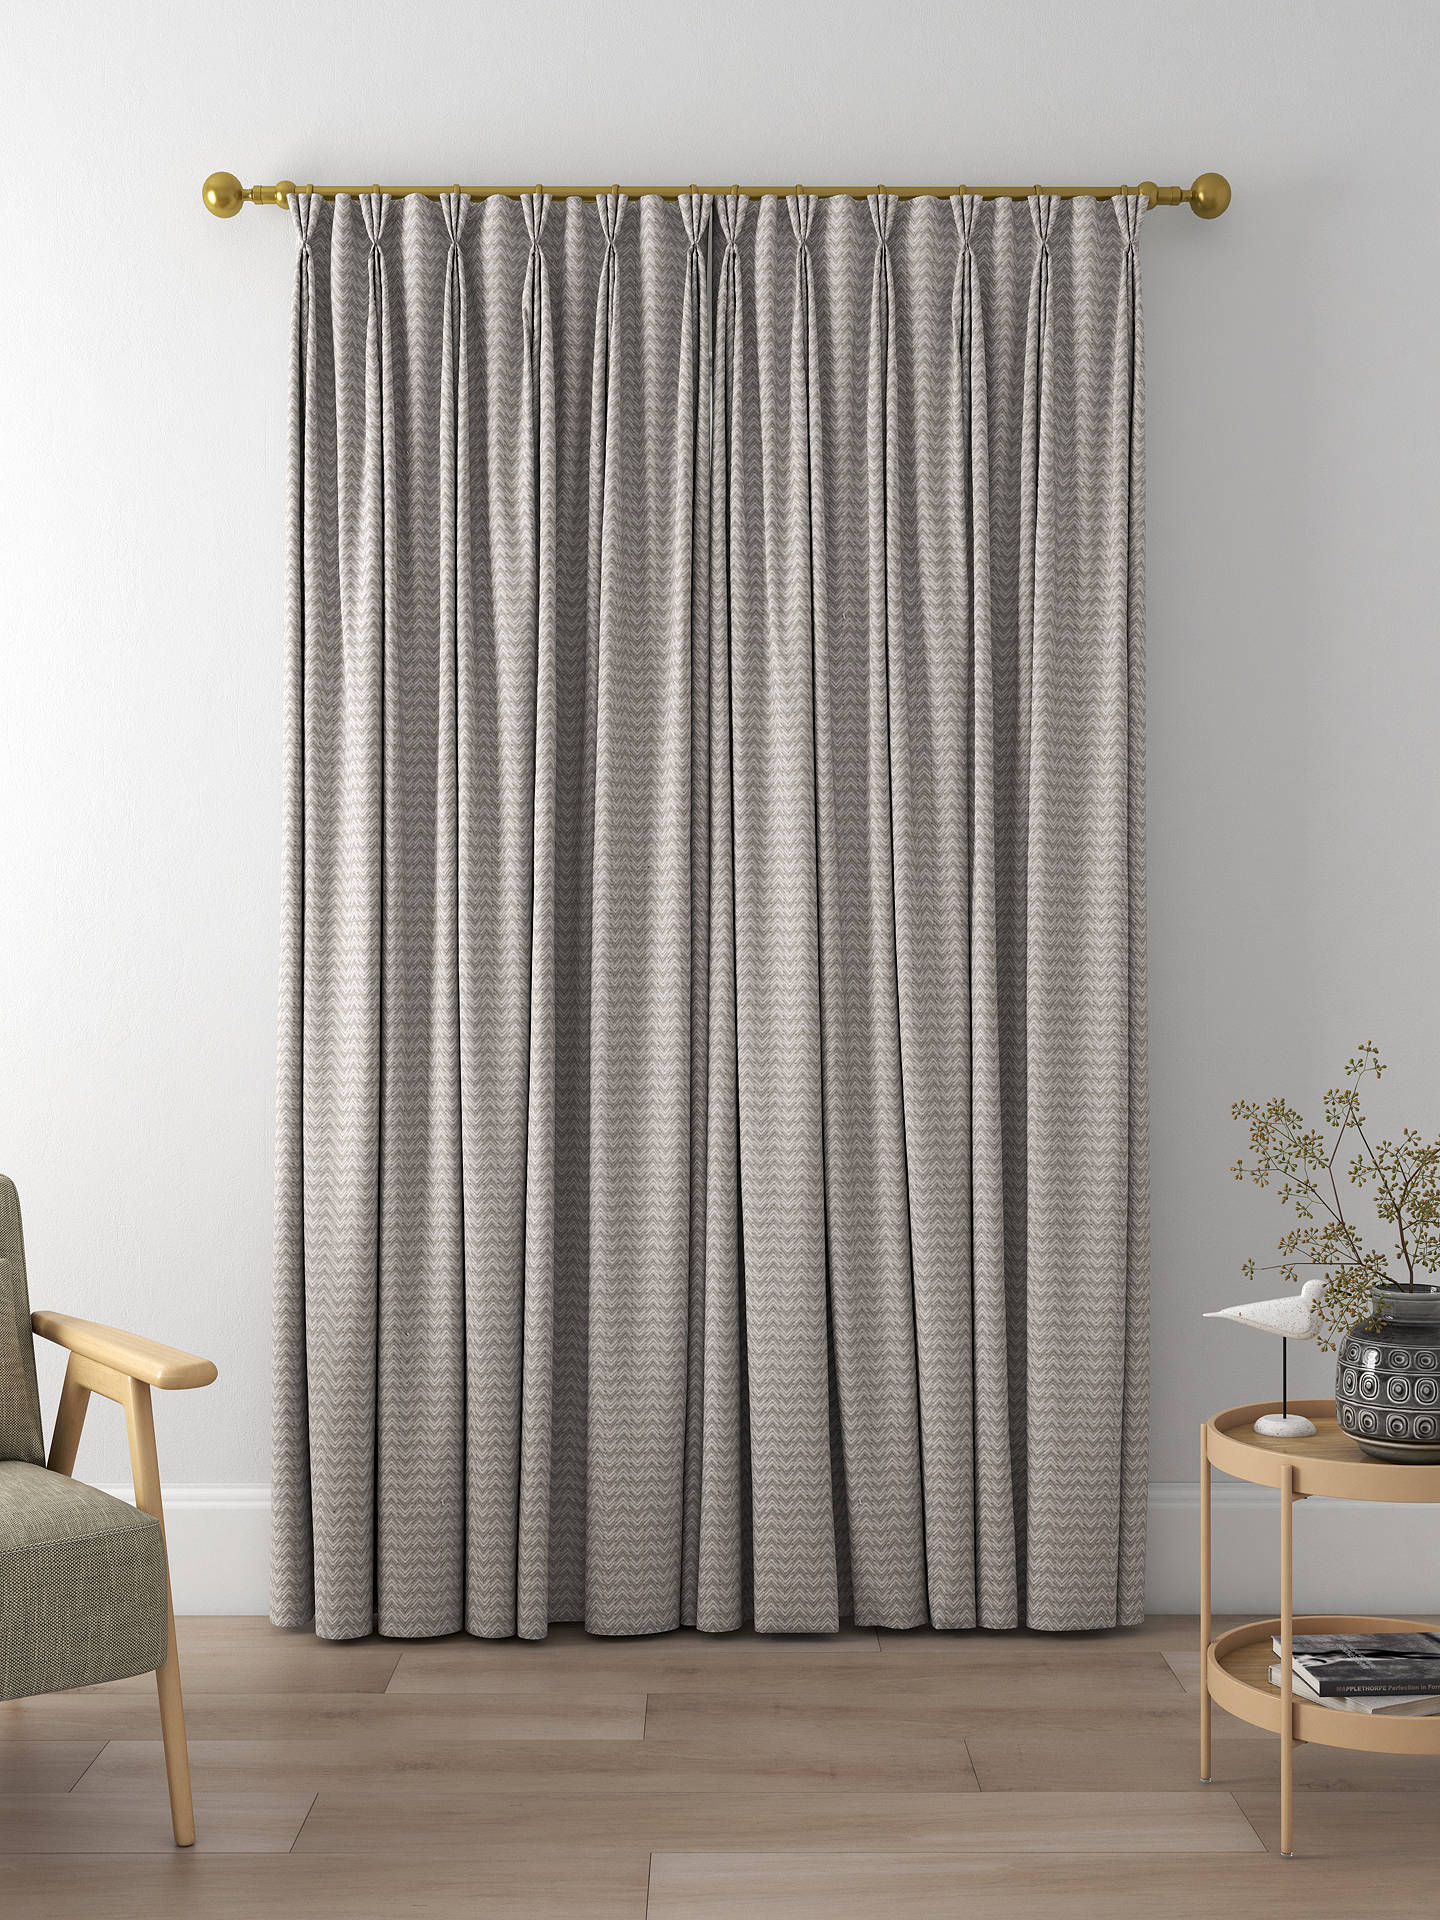 Sanderson Herring Made to Measure Curtains, Gull